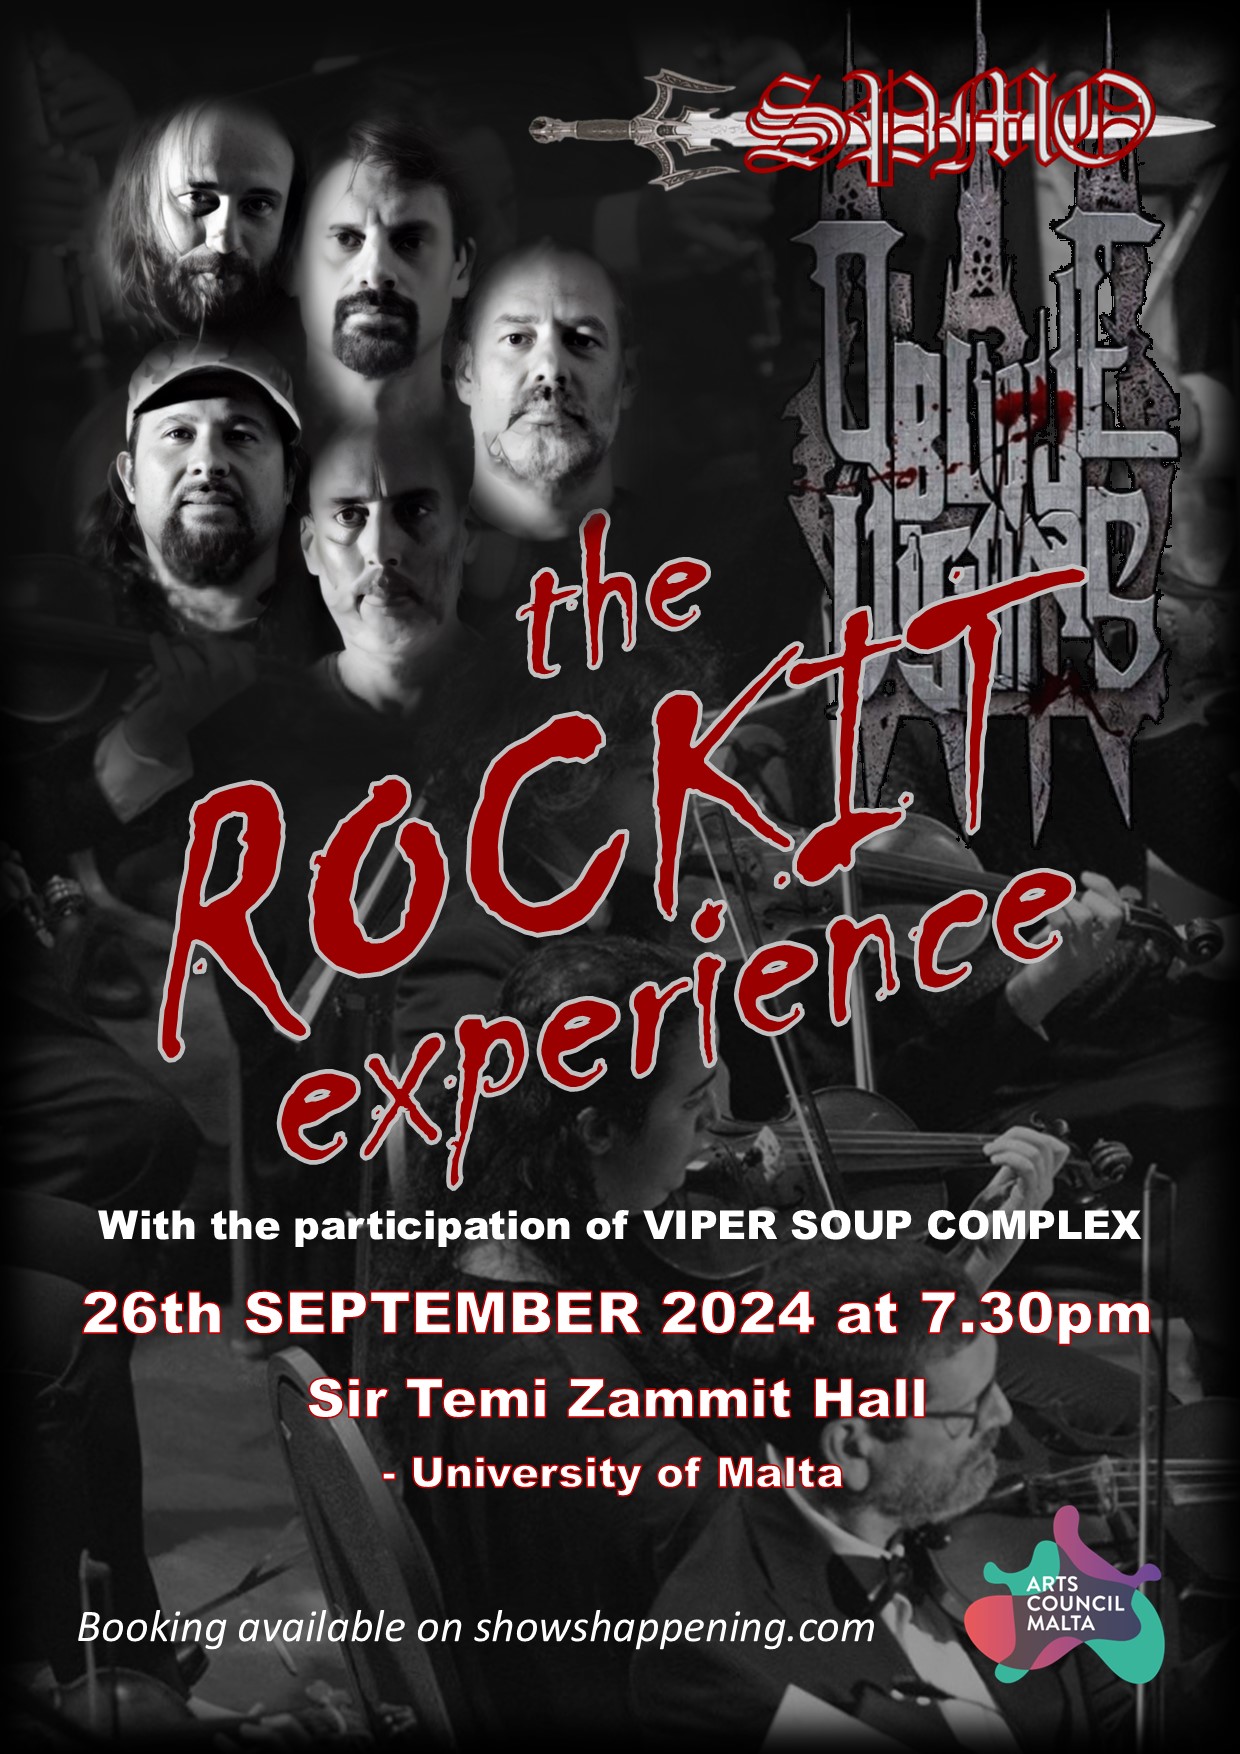 The ROCKIT Experience